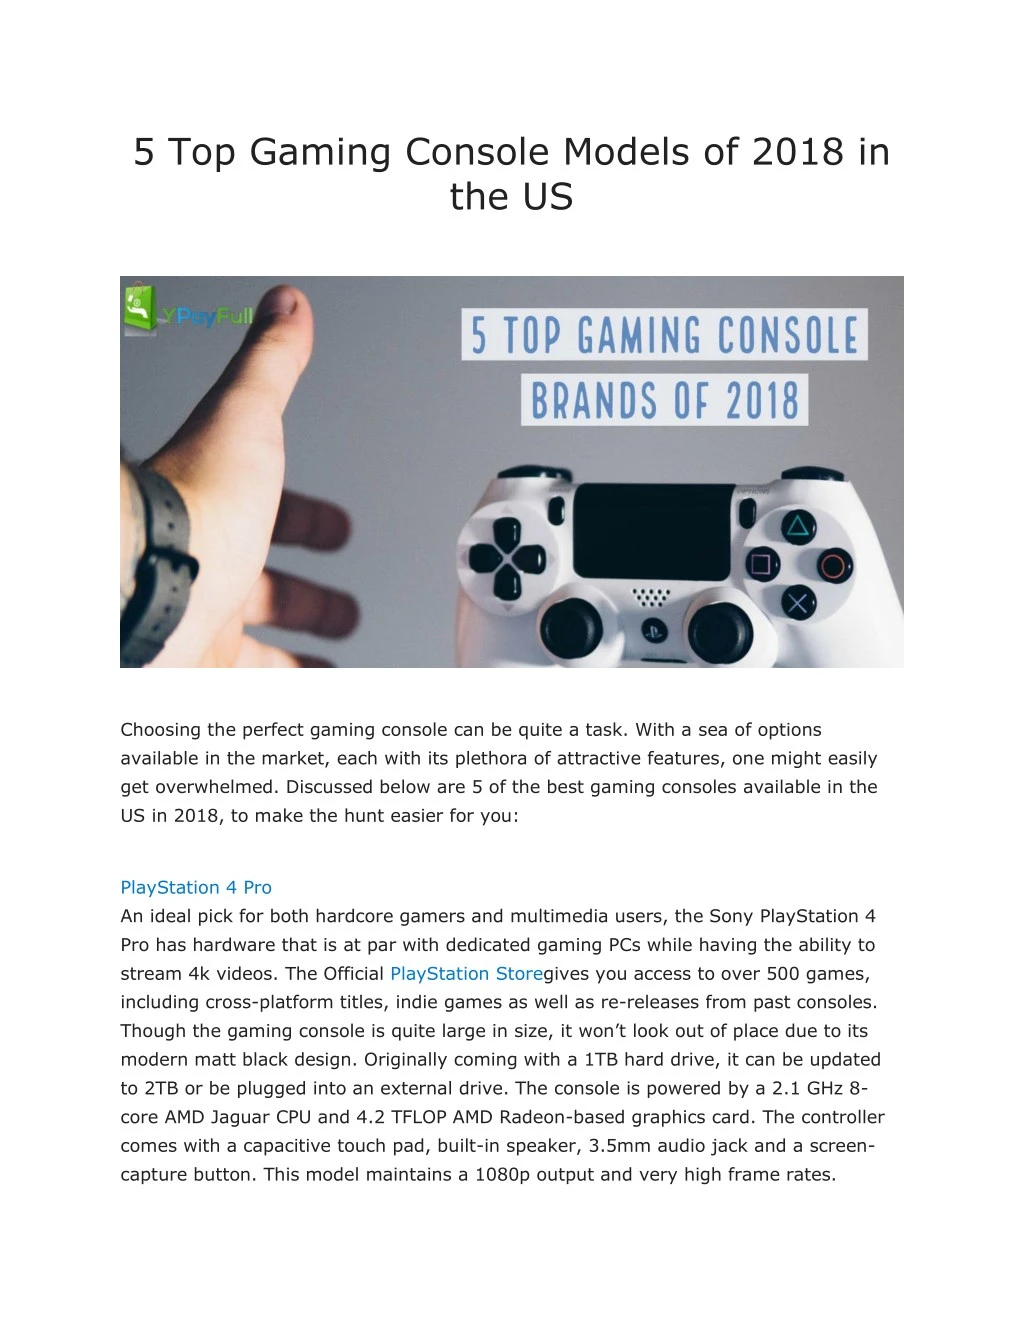 5 top gaming console models of 2018 in the us